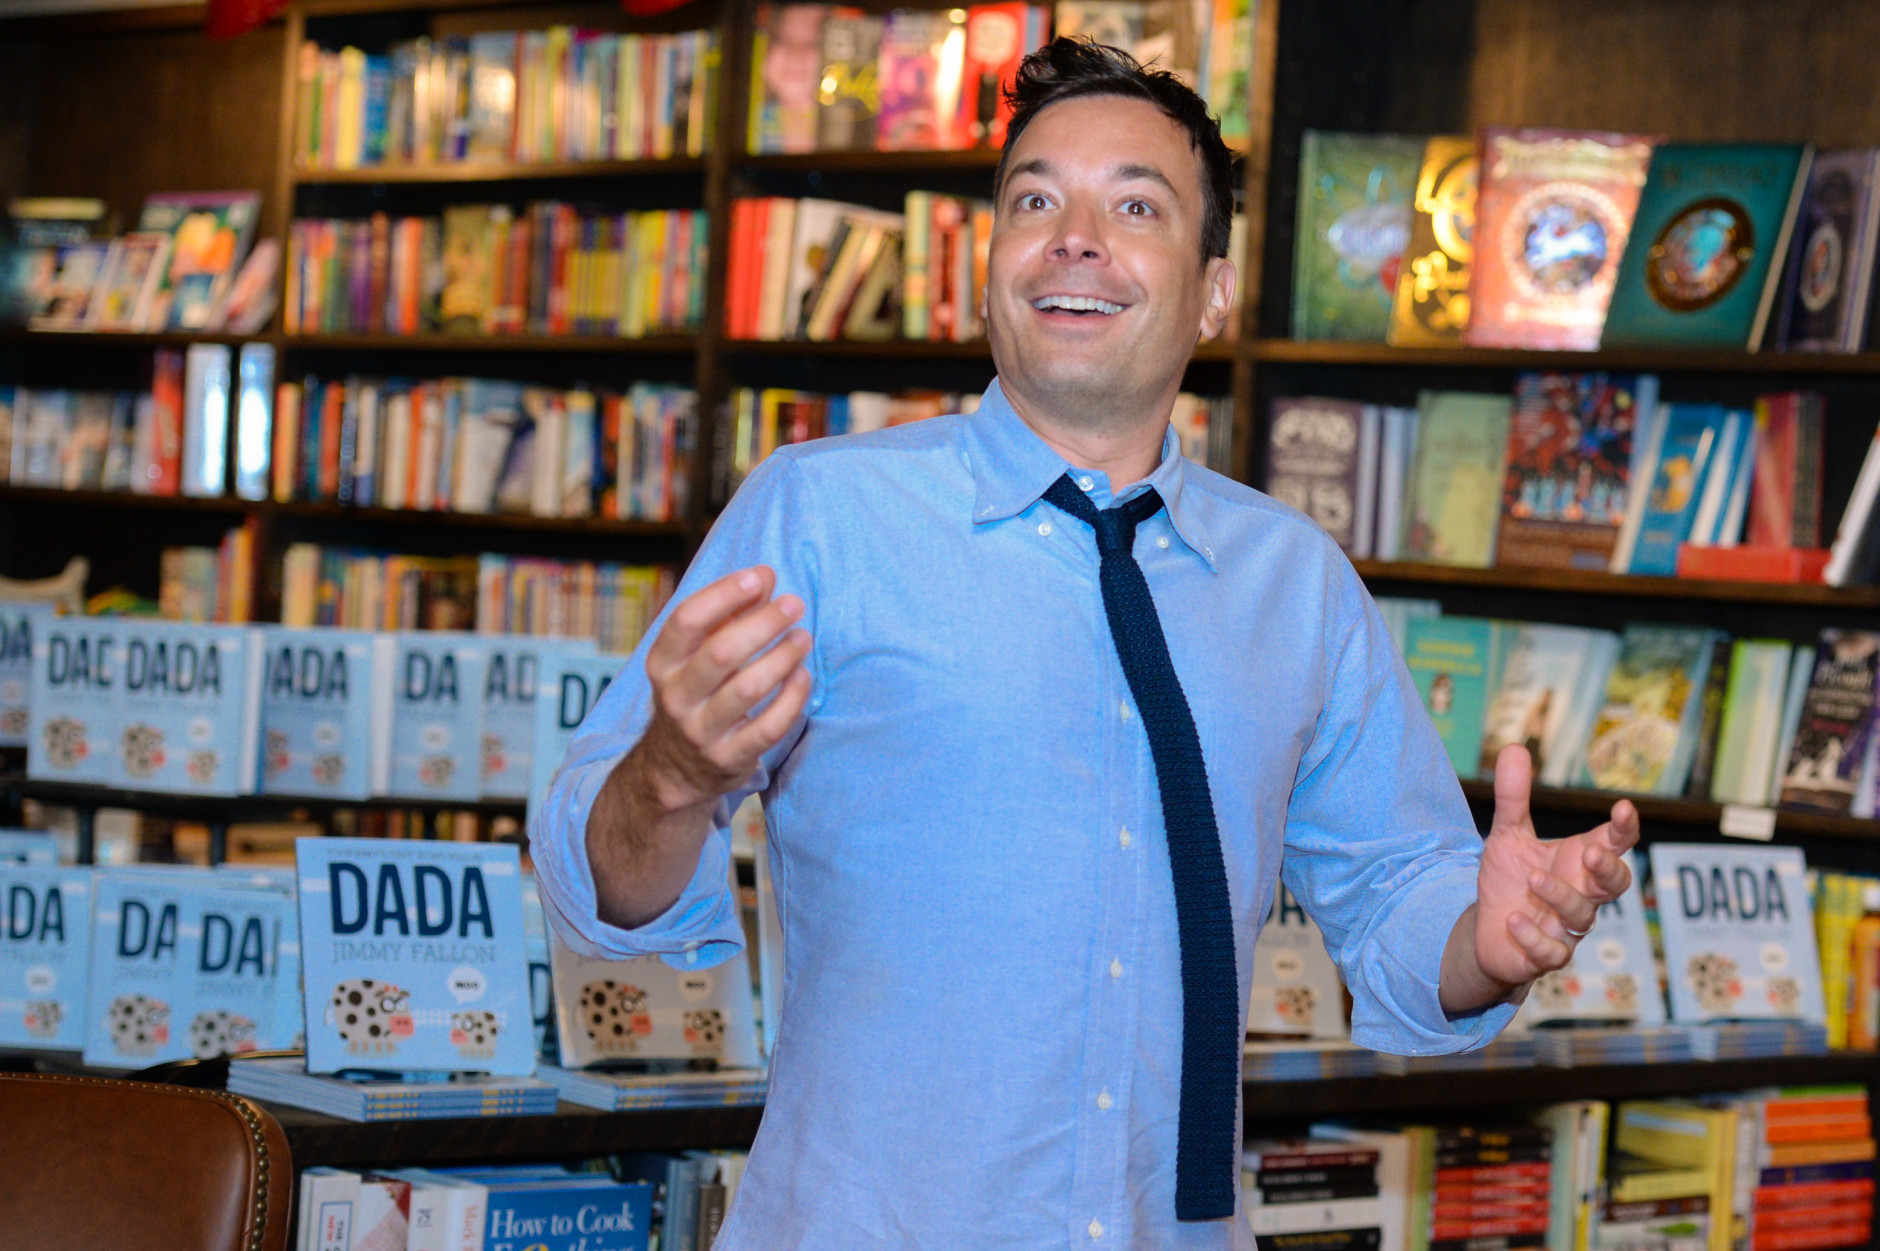 Comedian/talk-show host Jimmy Fallon is 41 on Sept. 19. Here, Fallon talks at a reading and signing for his new book "Your Baby's First Words Will Be 'Dada'" at Harbor Books on Saturday, June 20, 1015, in Sag Harbor, NY. (Photo by Scott Roth/Invision/AP)